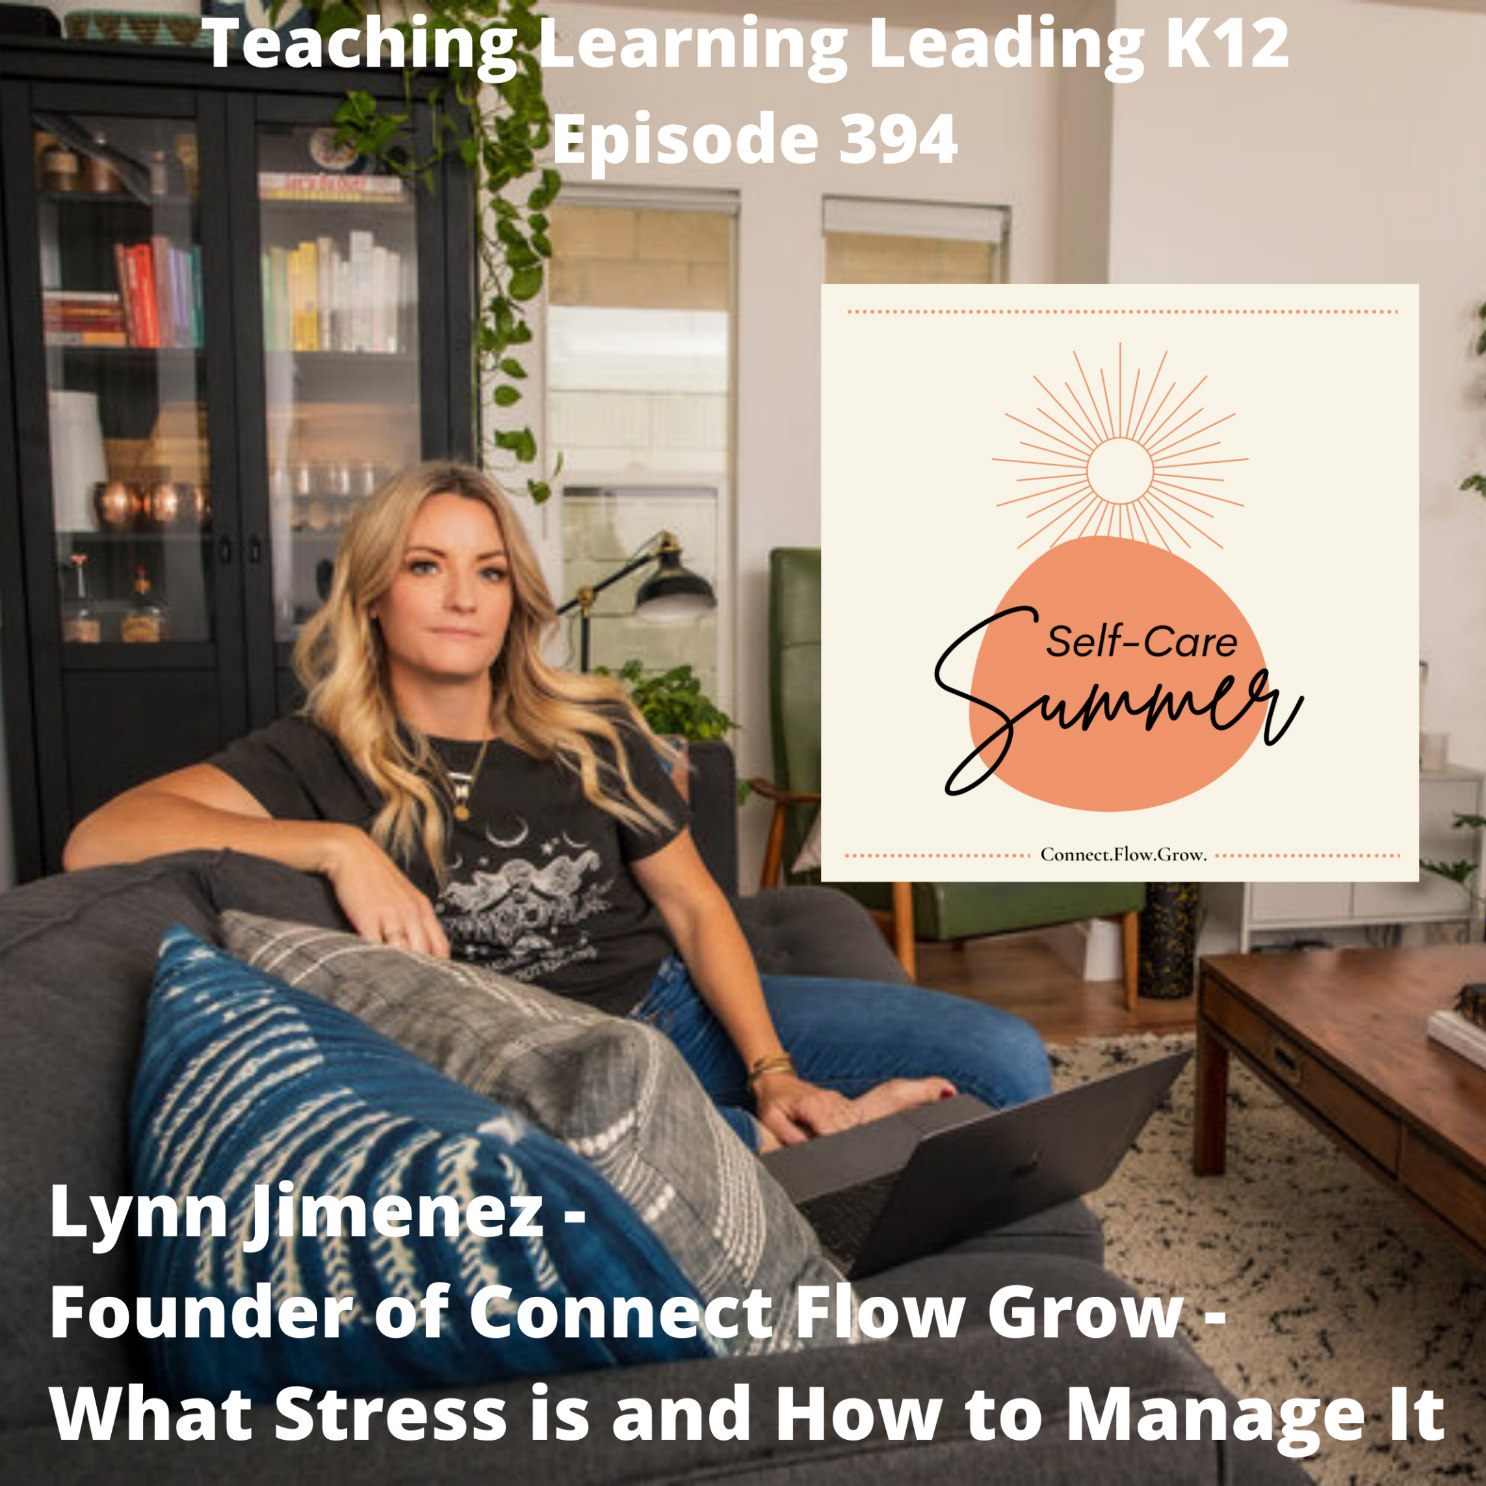 Lynn Jimenez - Founder of Connect Flow Grow - What Stress Is and How to Manage It - 394